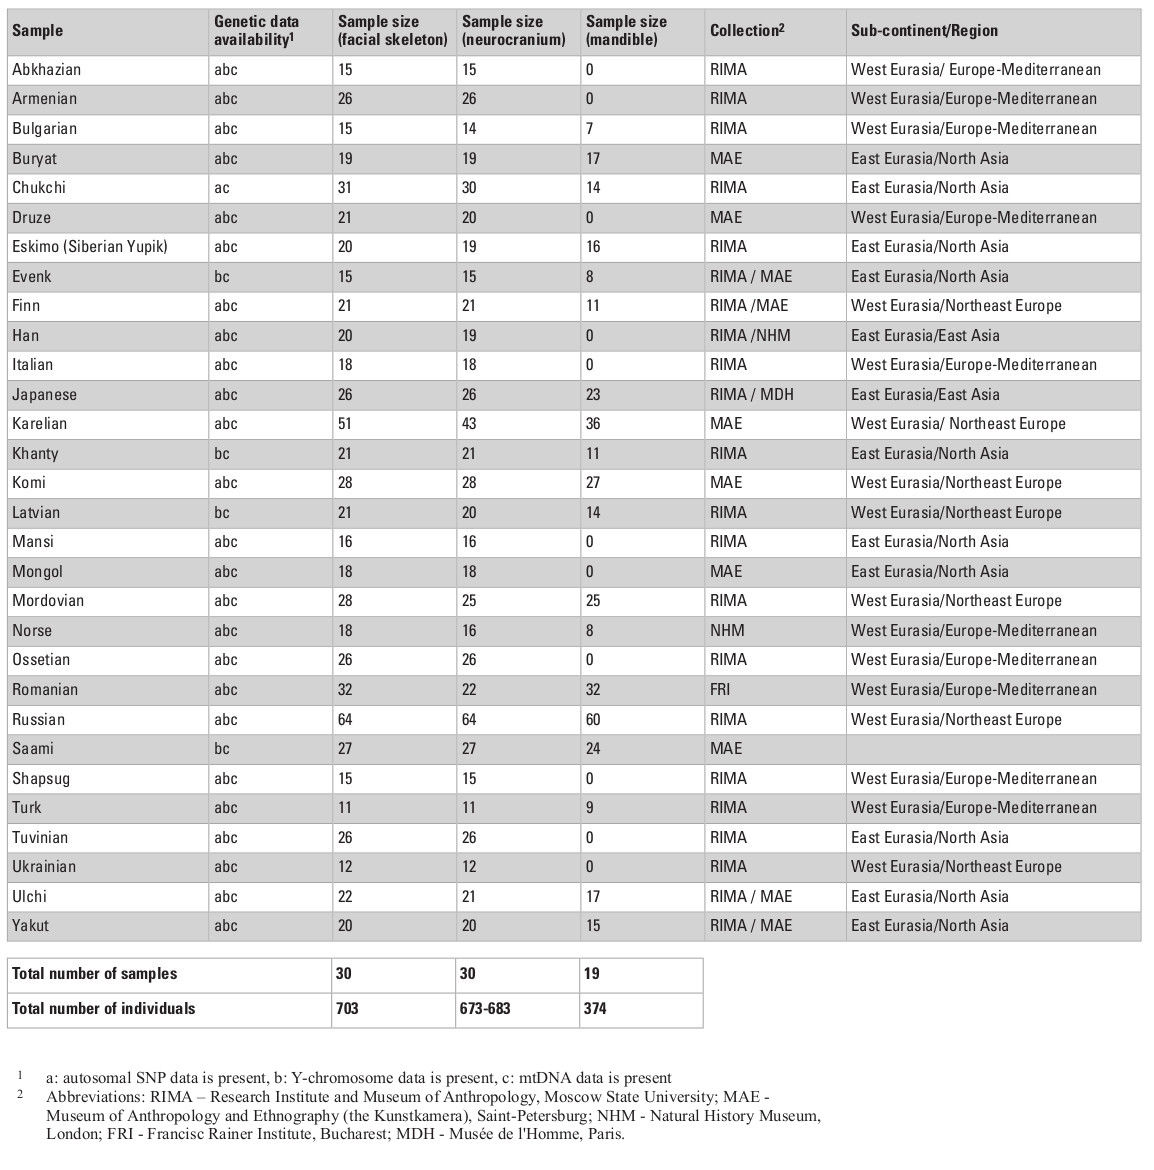 Table 1: Cranial sample populations, genomic data matching, sample sizes, provenance, and geography